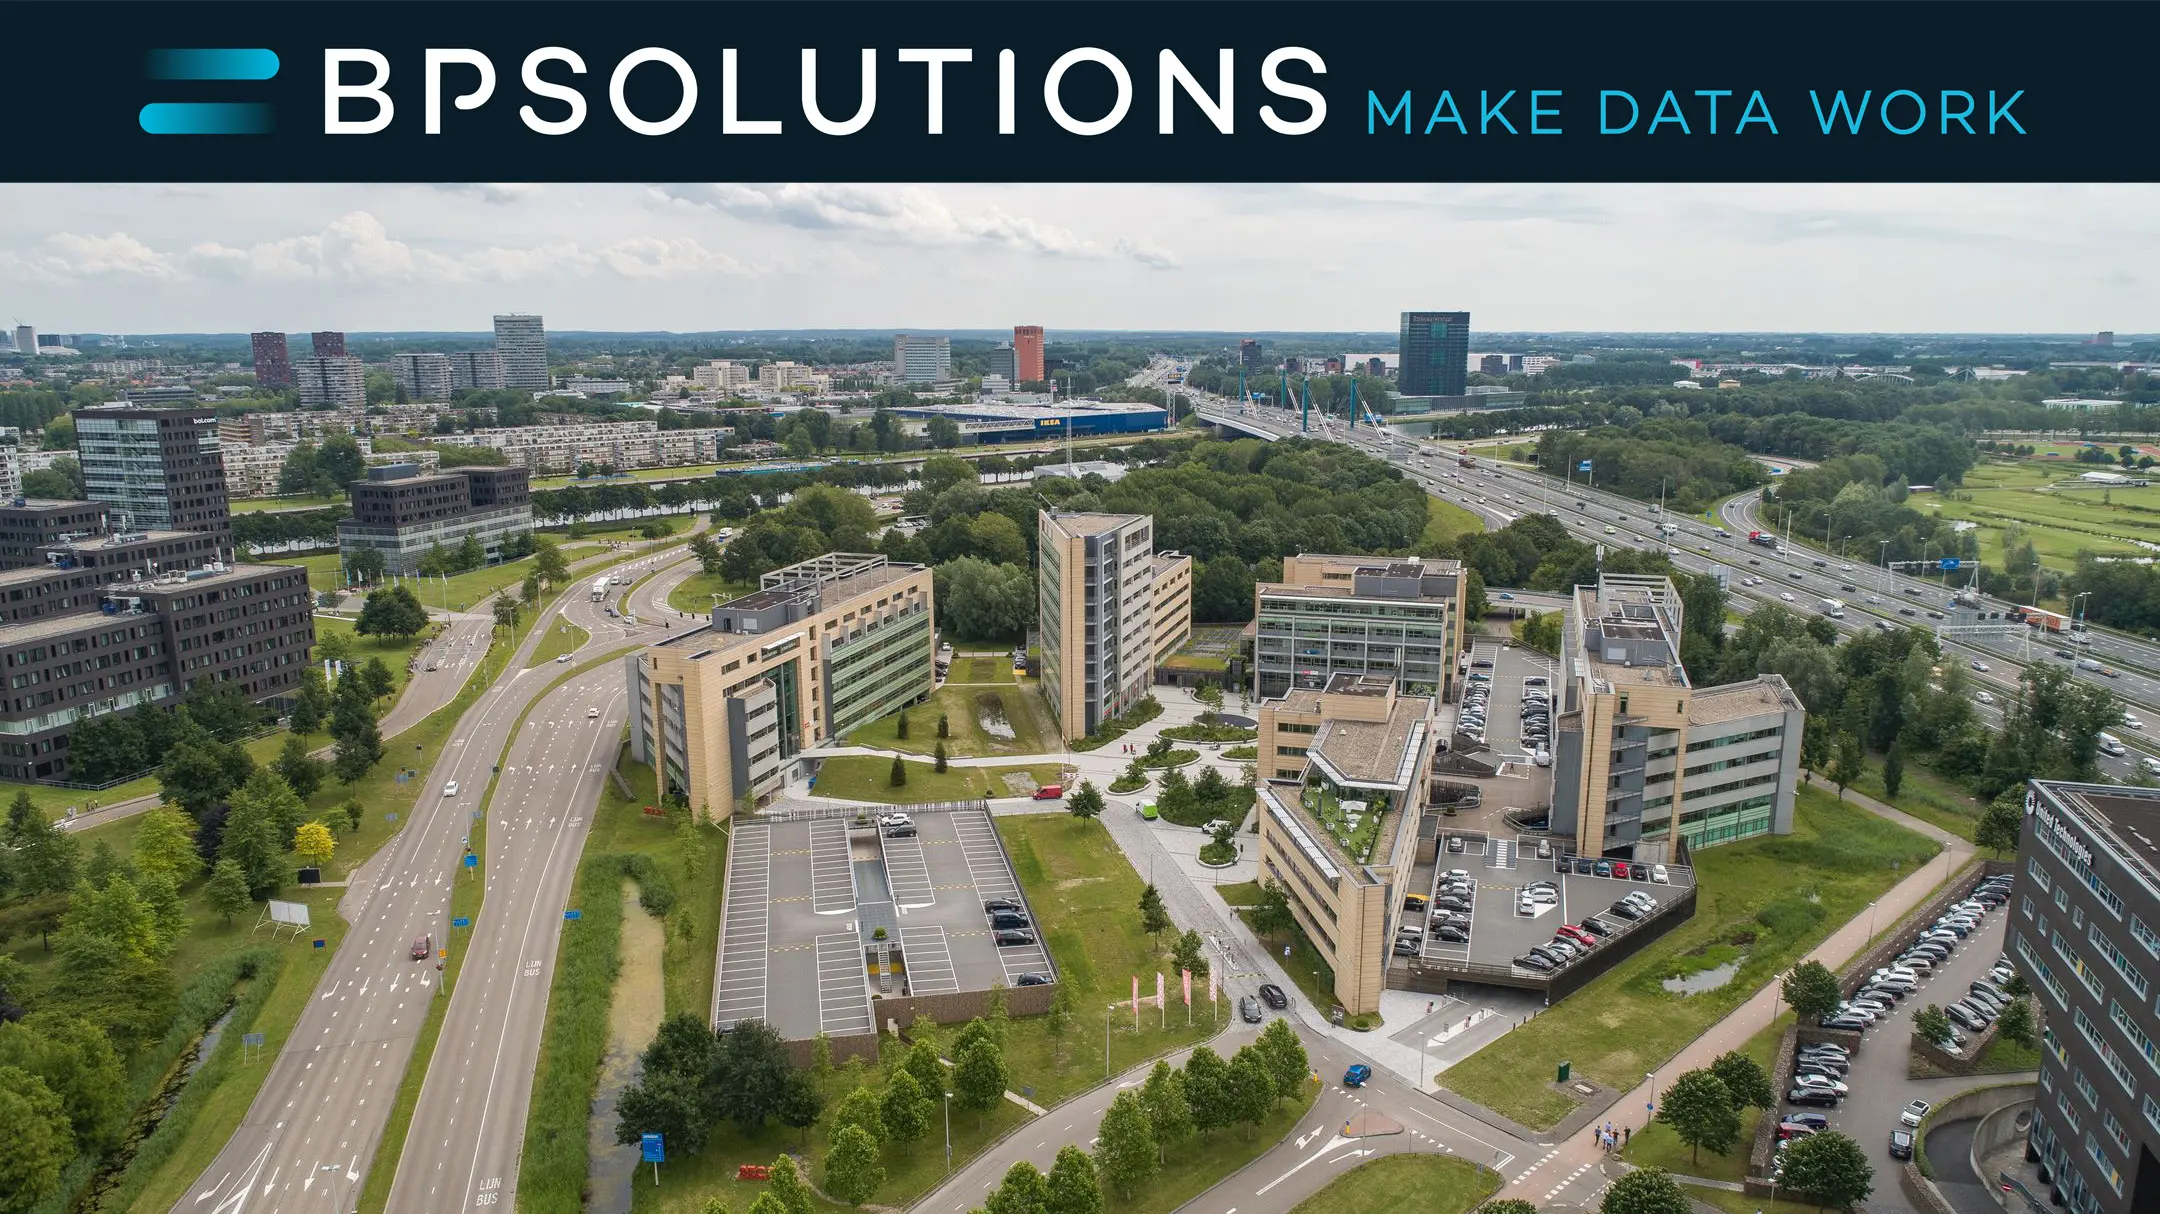 BPSOLUTIONS moves to Utrecht as of January 2021